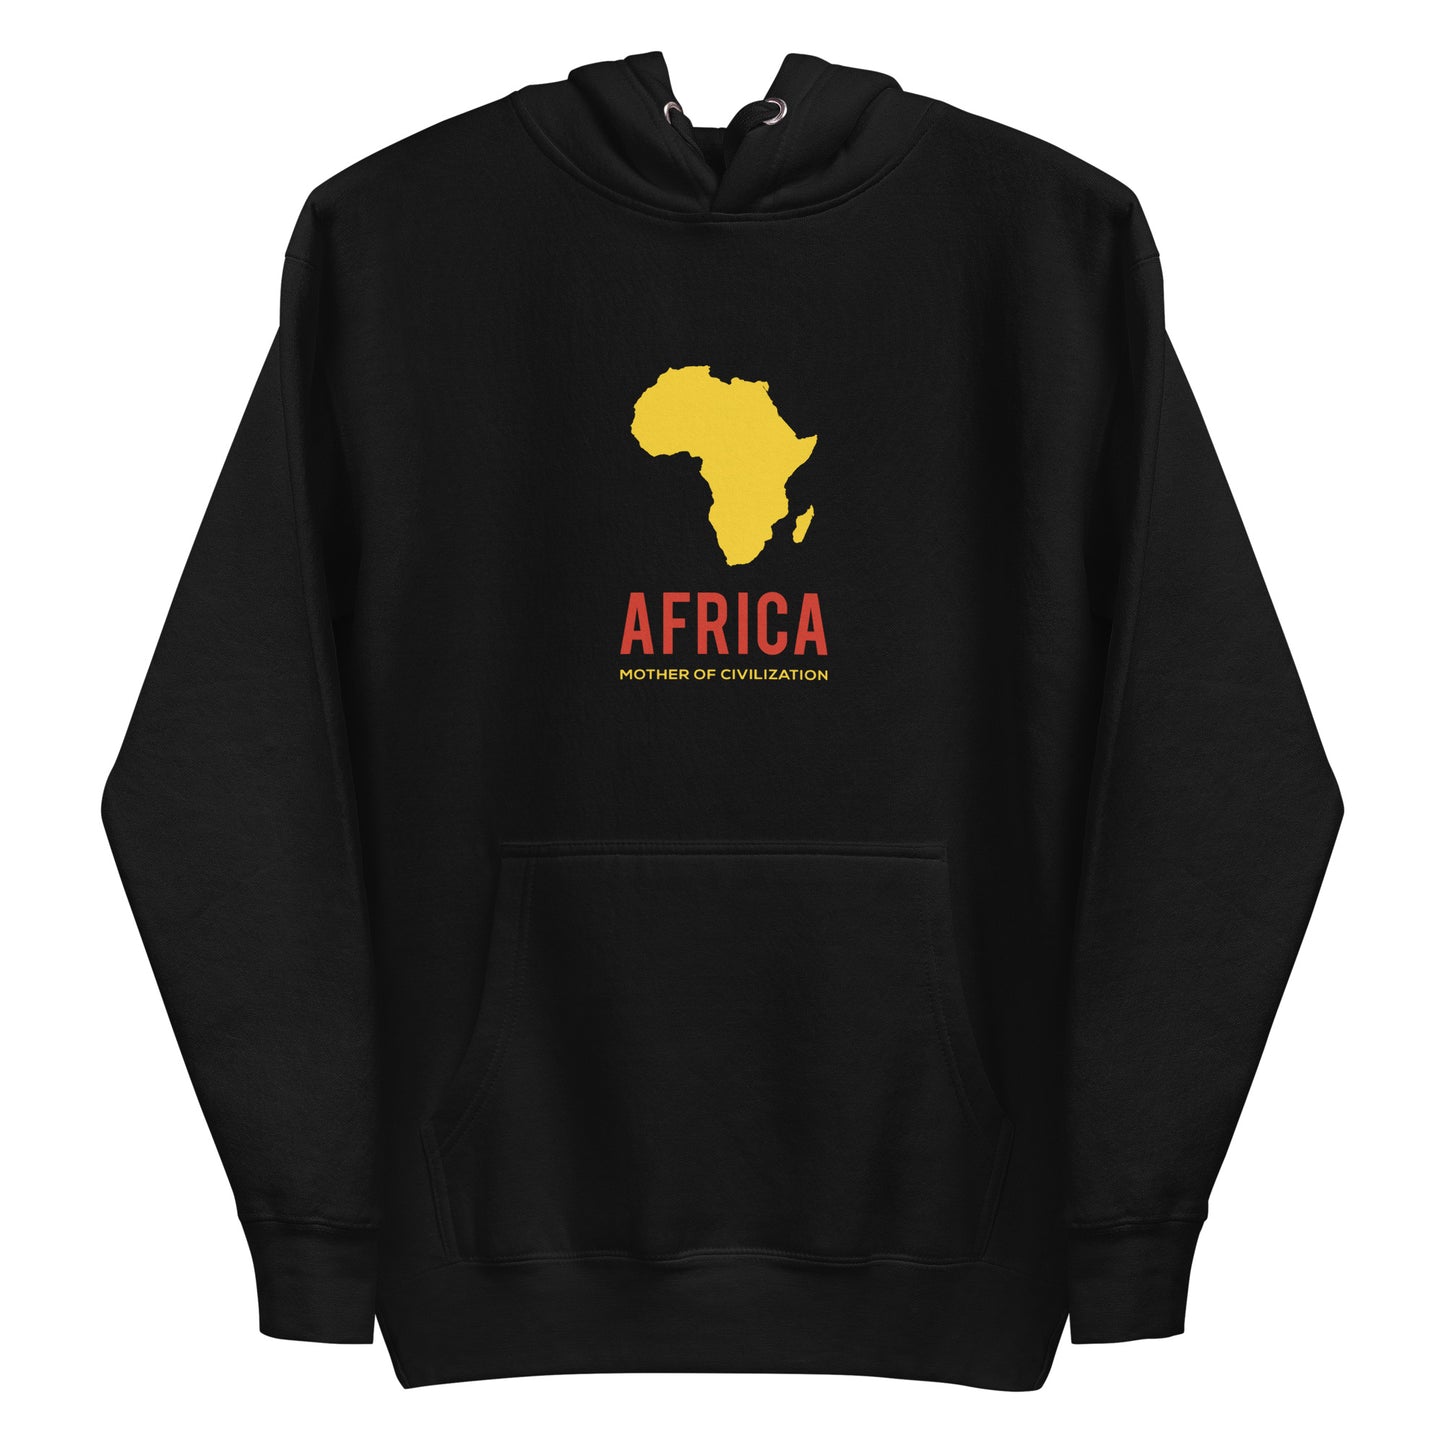 AFRICA - MOTHER OF CIVILIZATION Hoodie